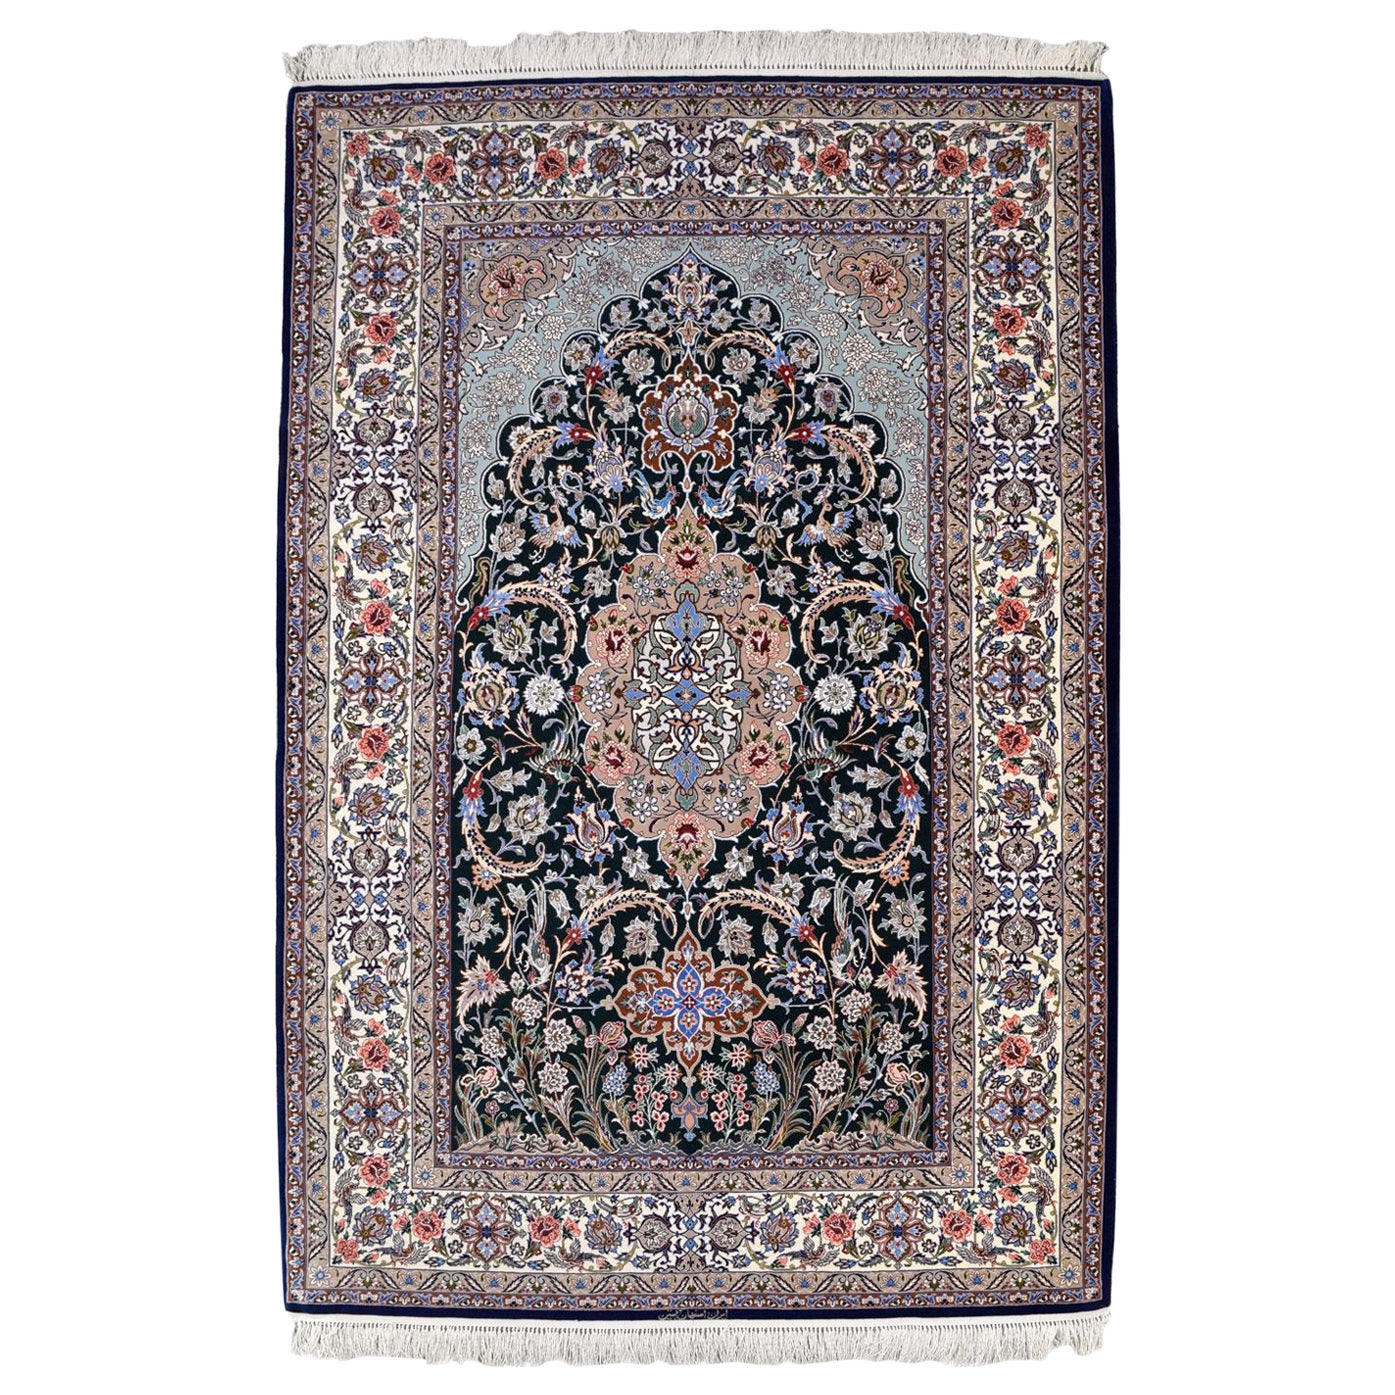 Isfahan Persian Carpet, Wool and Silk in Blue, Cream and Red, 5' x 7'